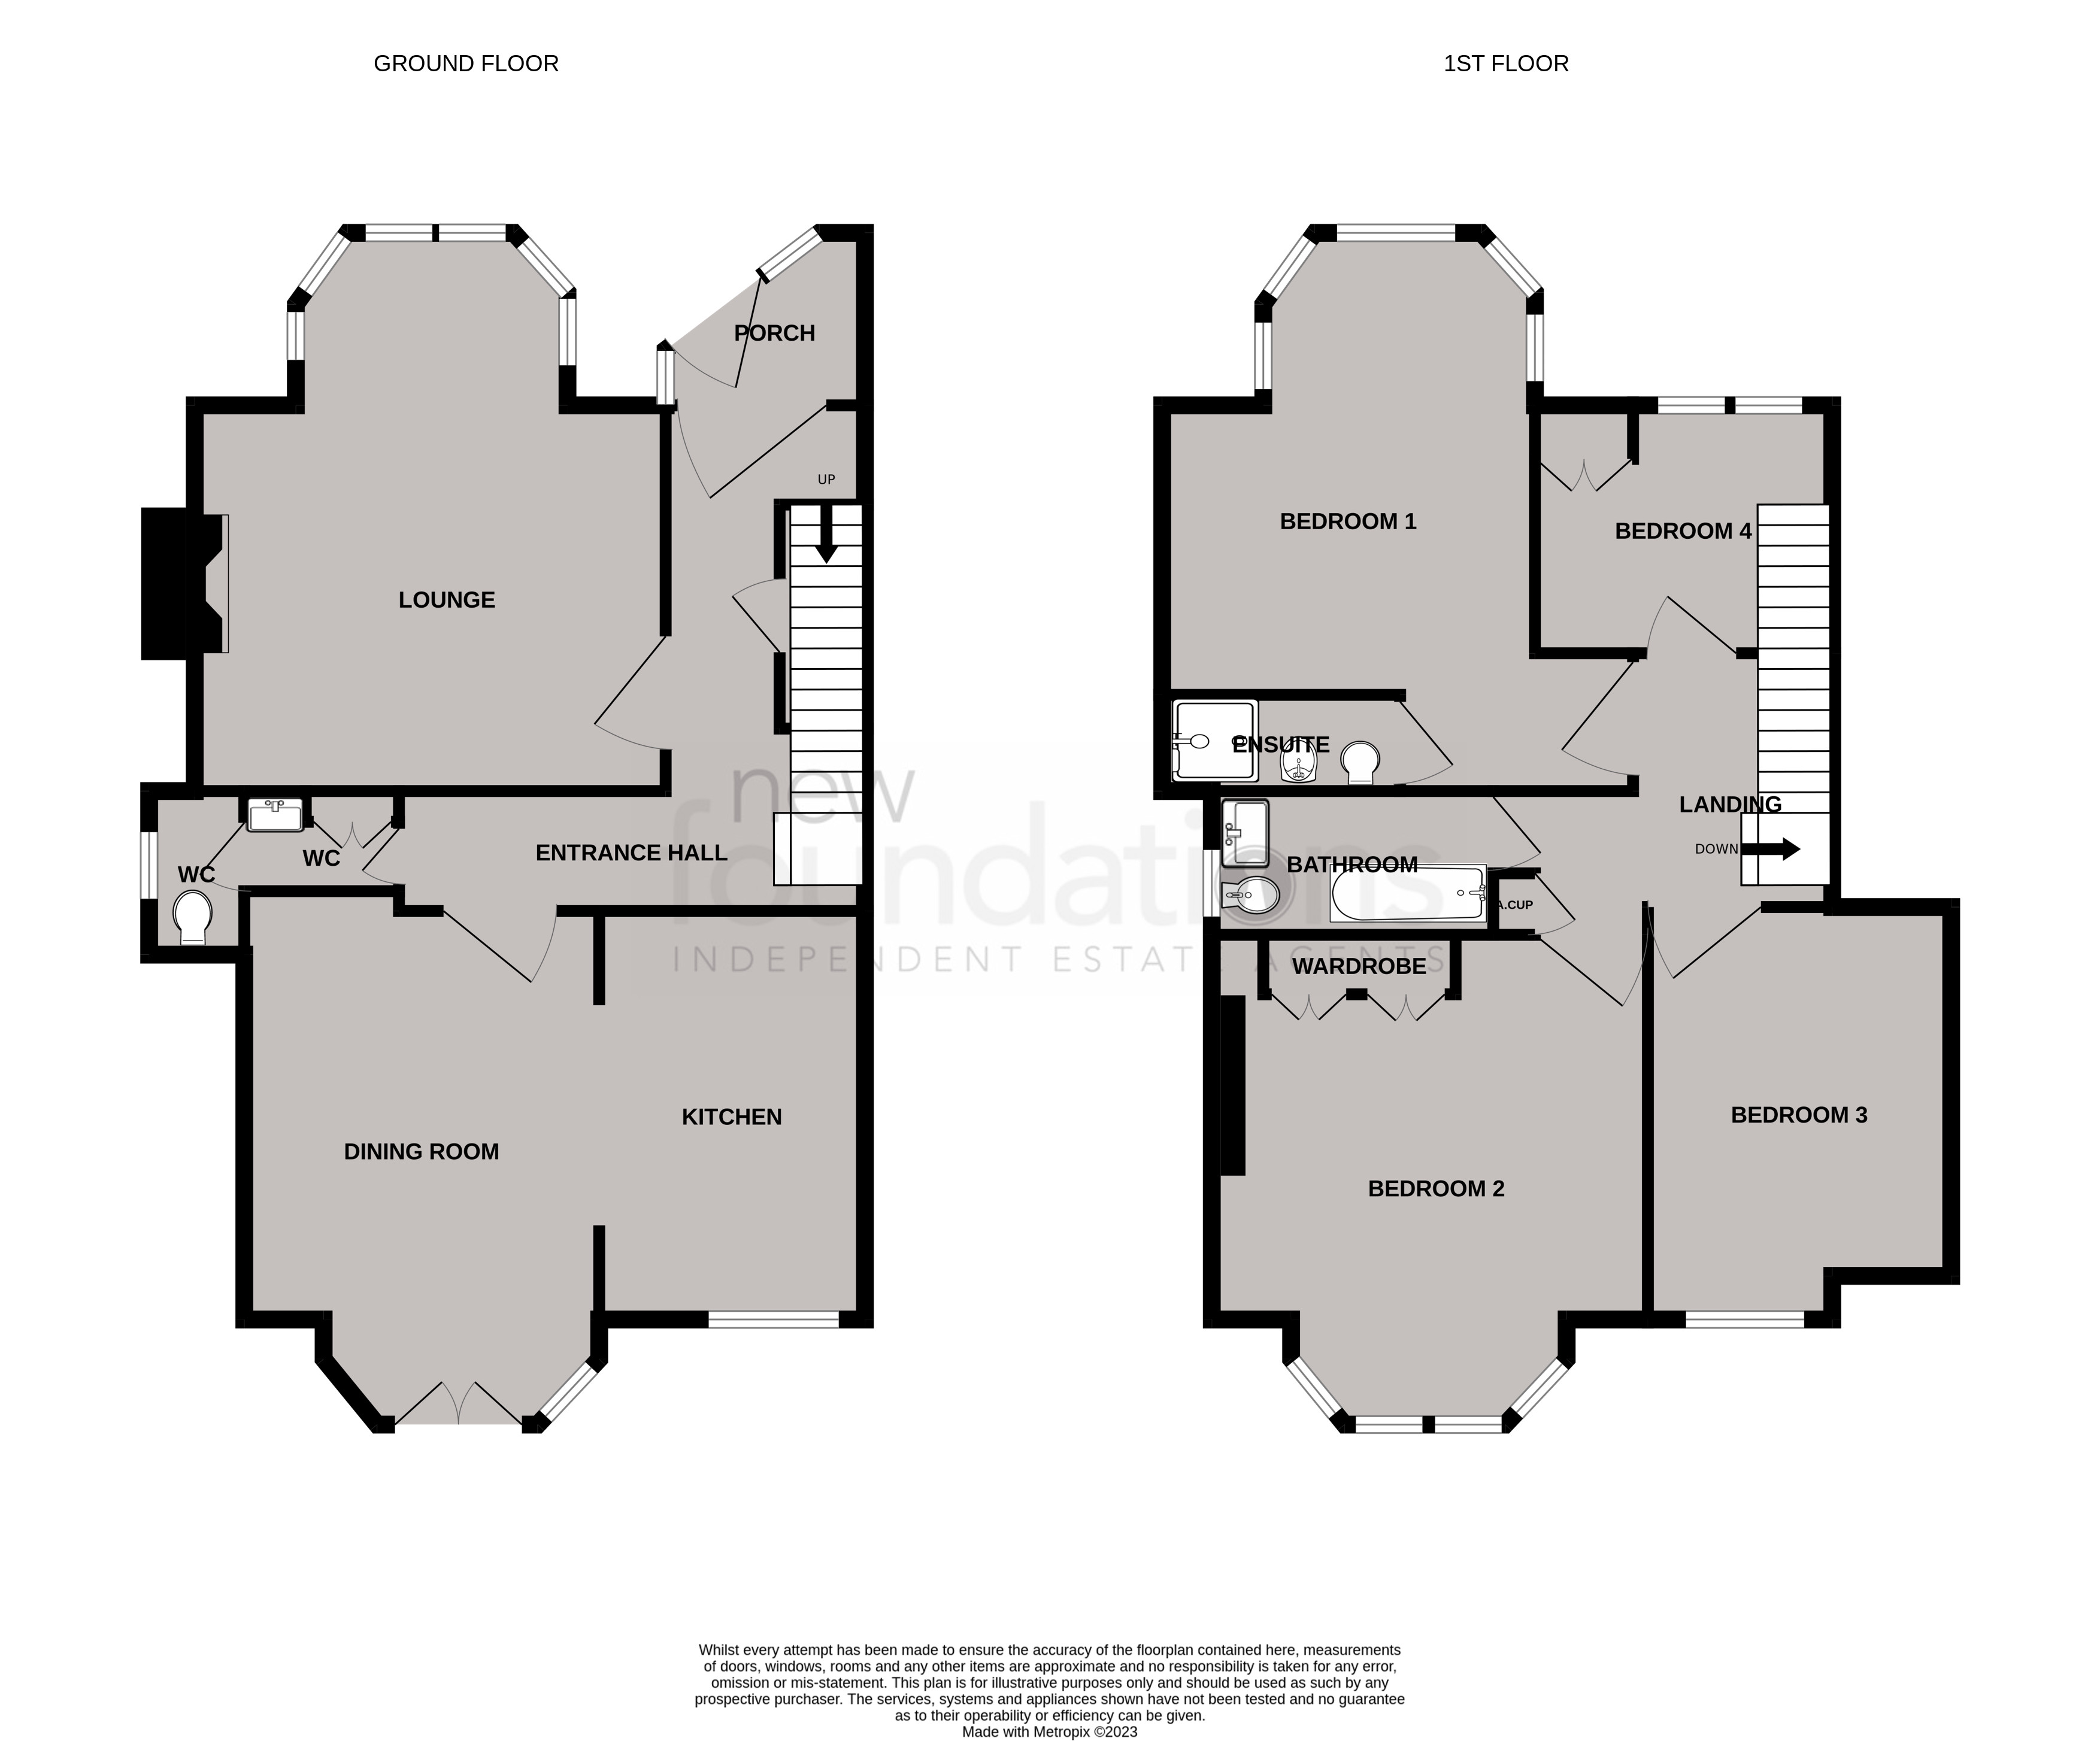 Floorplans For Upper Sea Road, Bexhill-on-Sea, East Sussex